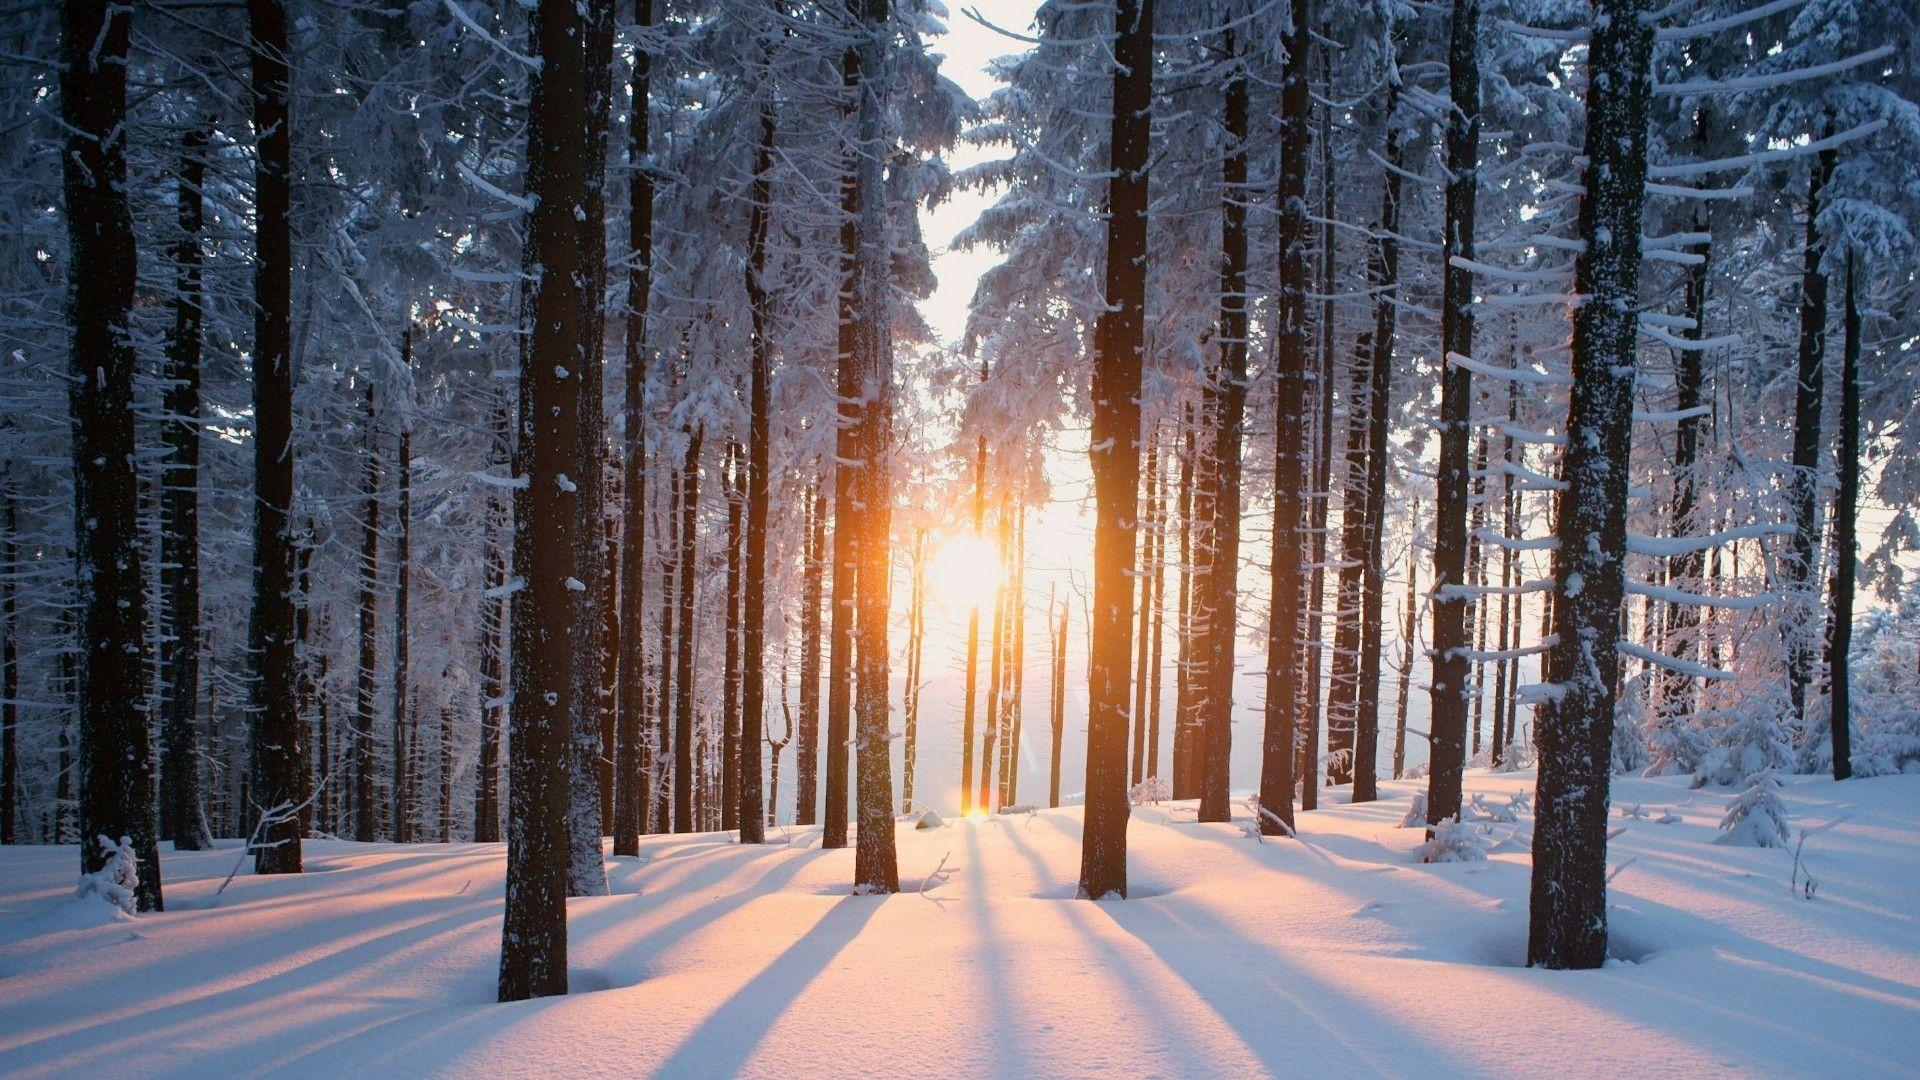 Snowy Forest Wallpaper Free Snowy Forest Background